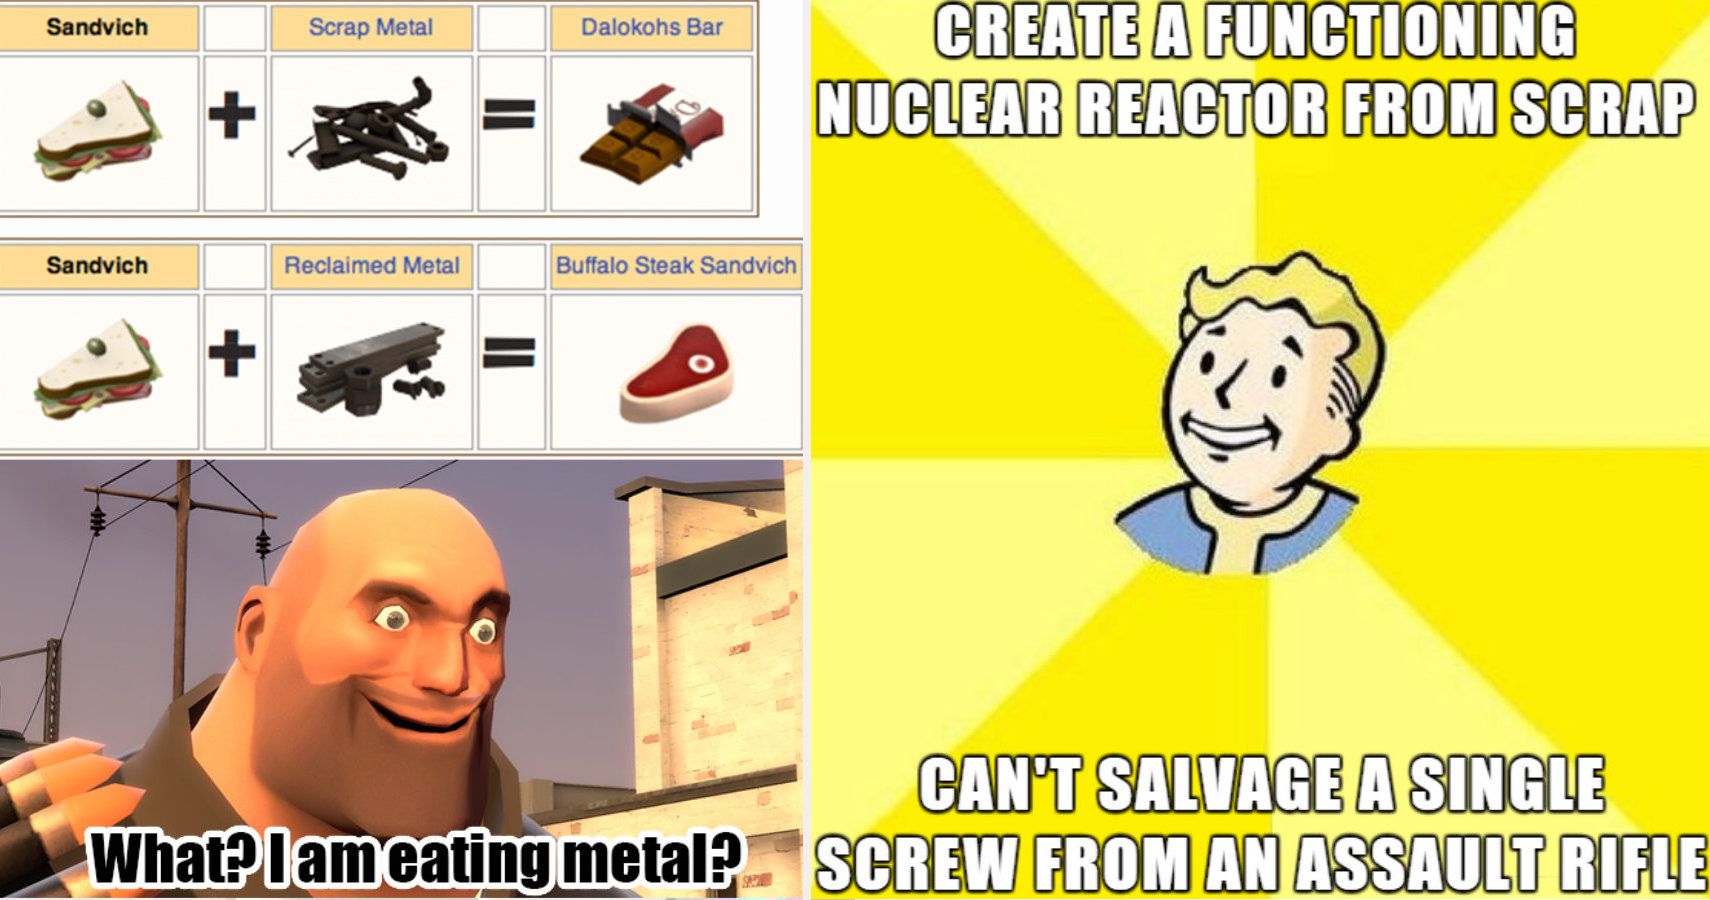 Left side Team Fortress 2 metal meme, right side fallout no screws in assault rifle meme.